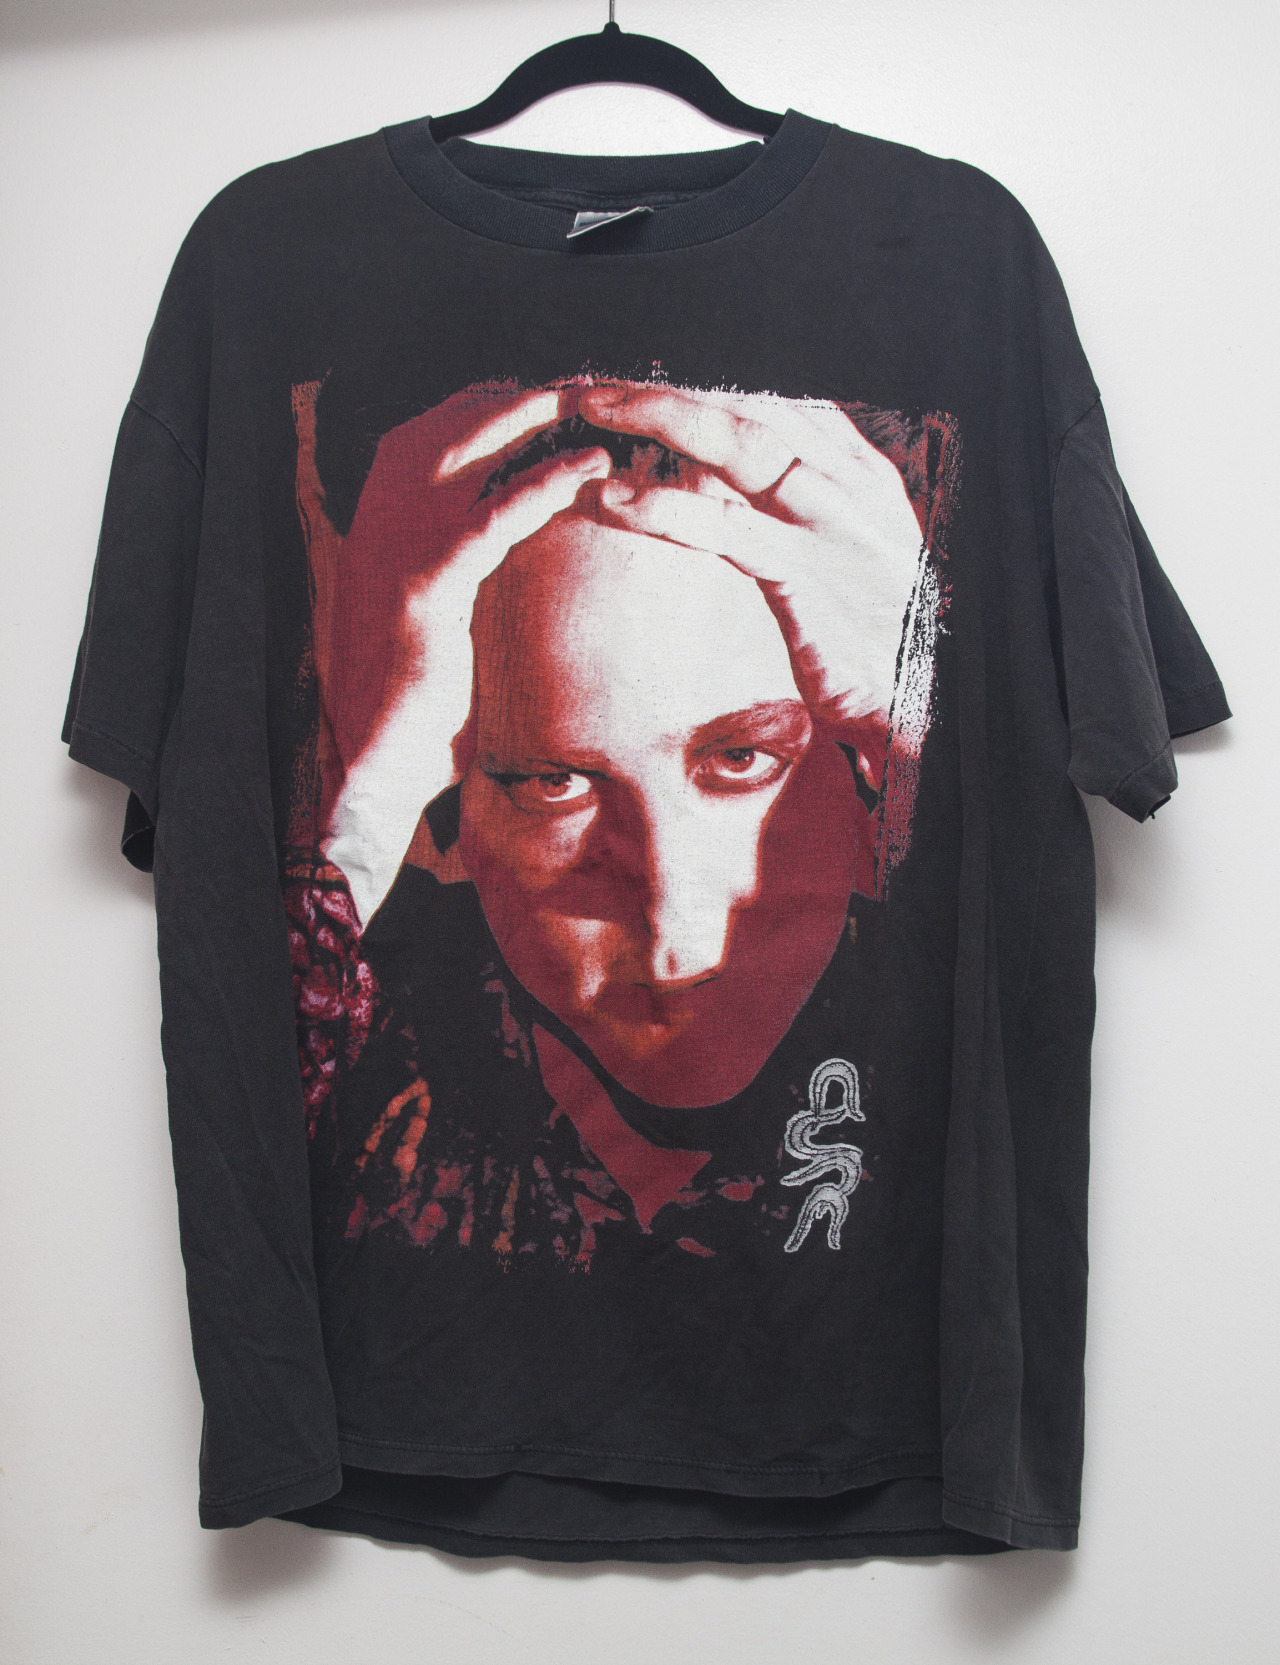 darthlader:The Cure, “Wish” 1992 vintage tour t-shirt Purchase here